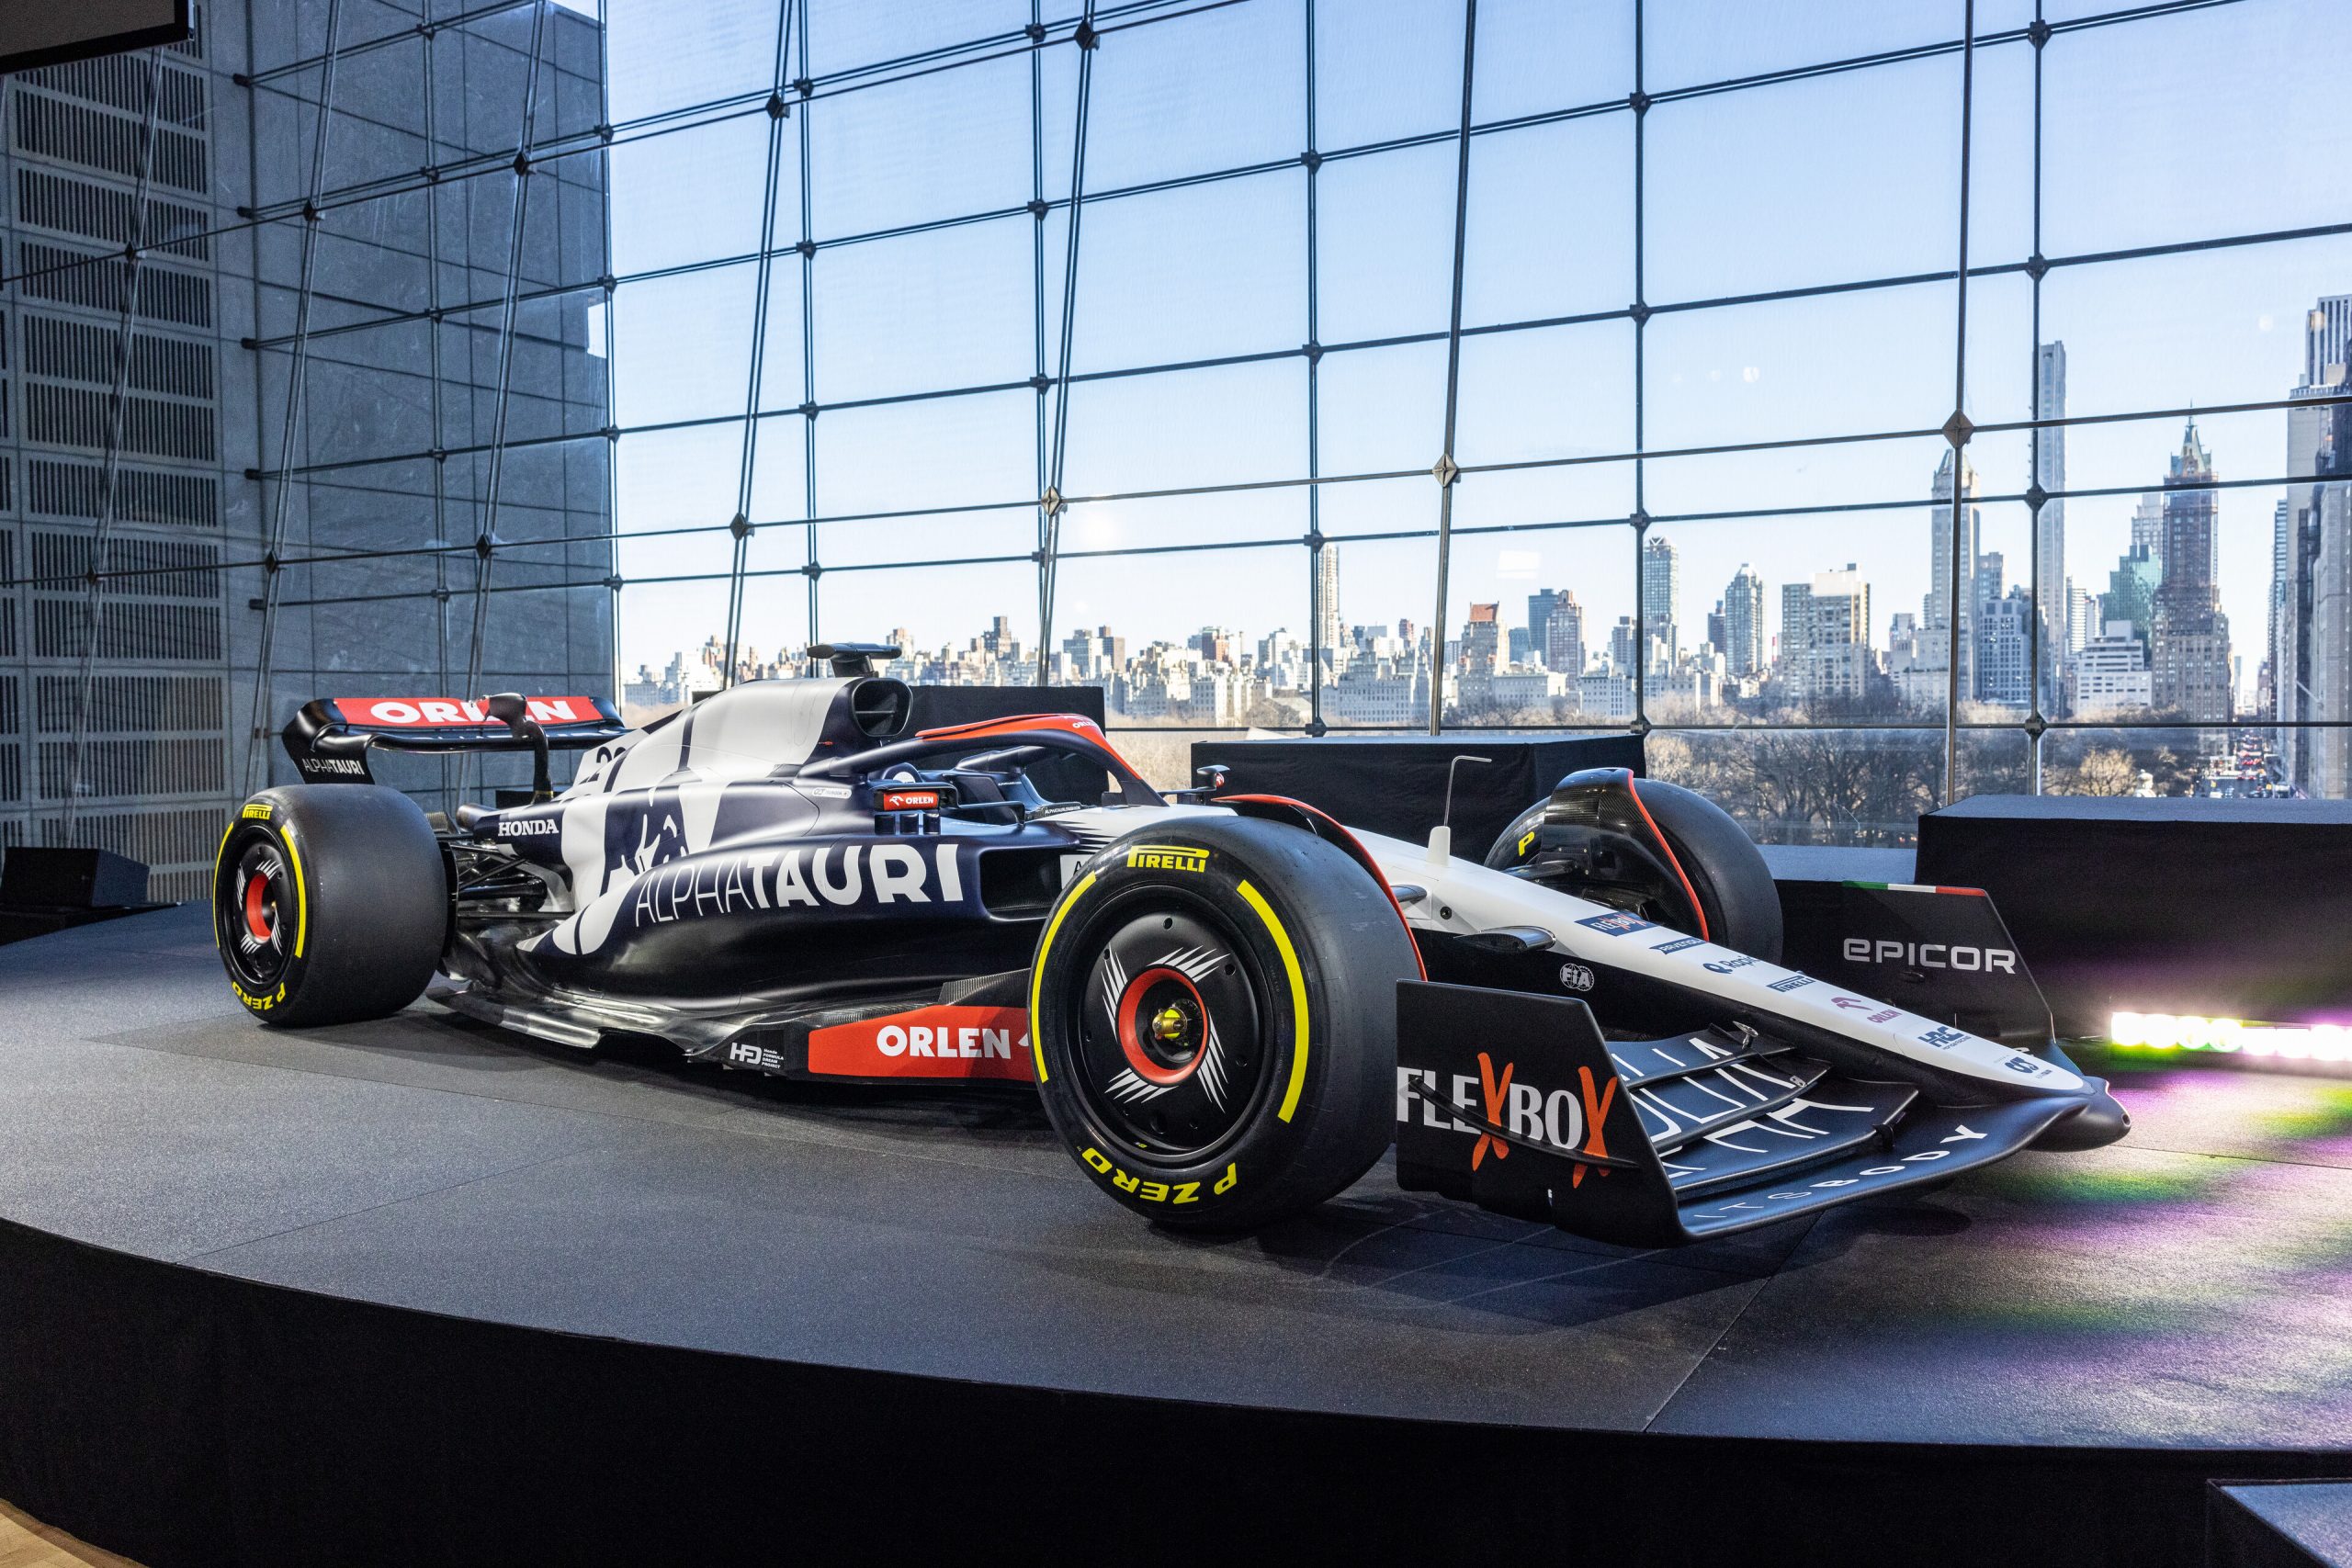 The new Scuderia AlphaTauri Formula One car at the Scuderia AlphaTauri Season Launch at Lincoln Center in New York, NY on February 11, 2023. // Colin Kerrigan / Red Bull Content Pool // SI202302120036 // Usage for editorial use only //